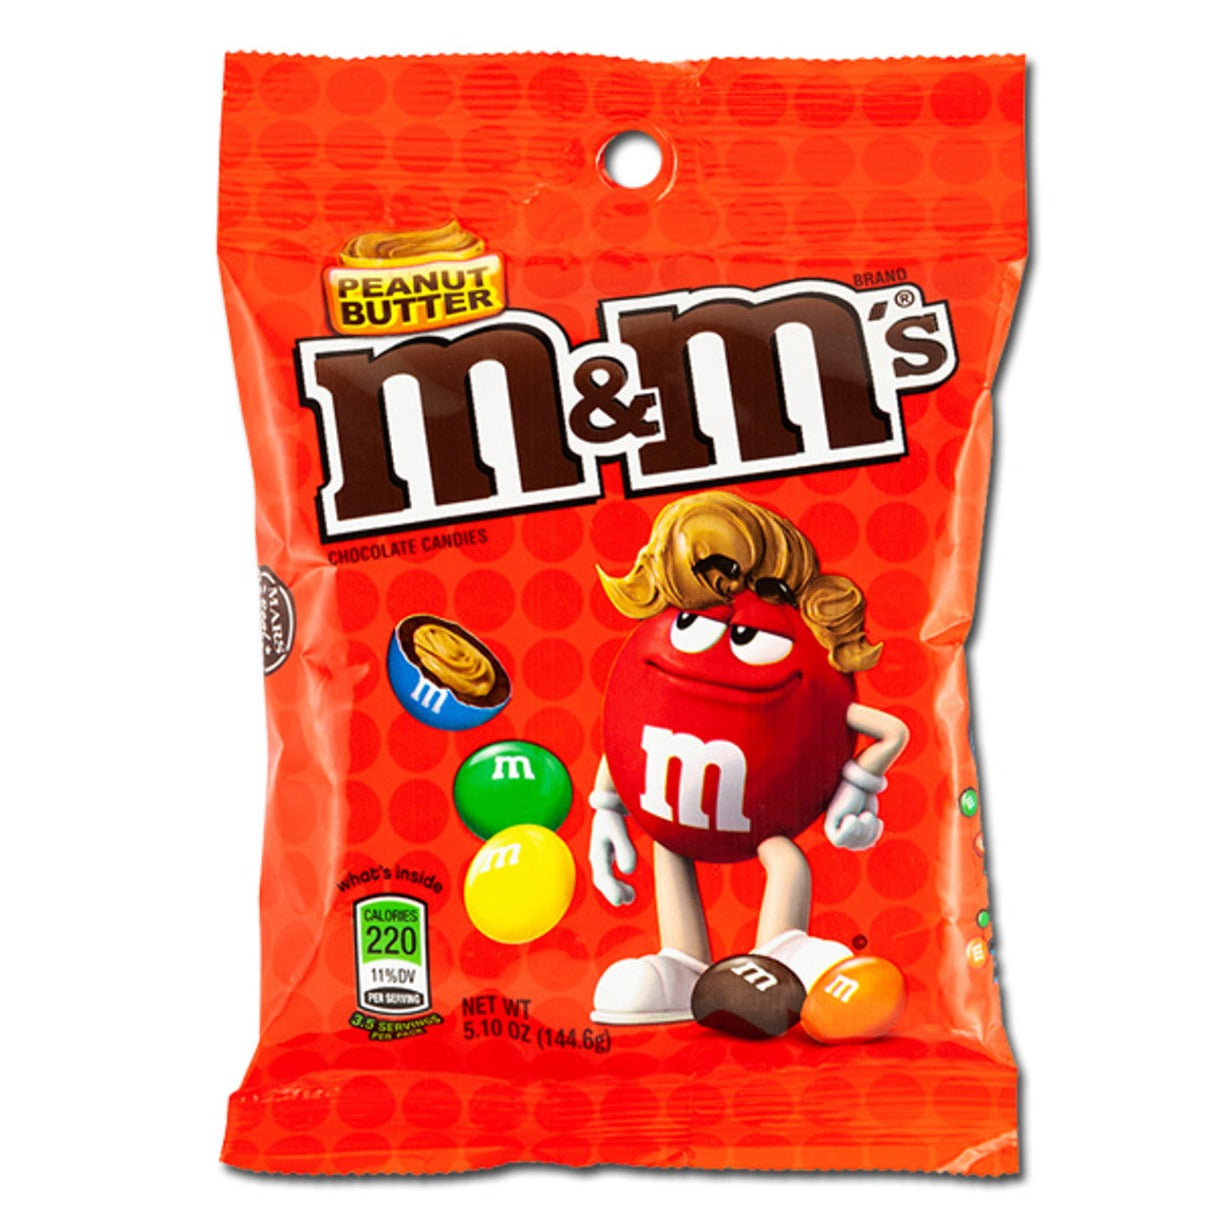 M&M's Milk Chocolate Peanut Butter Candies with Messages 1.63 oz